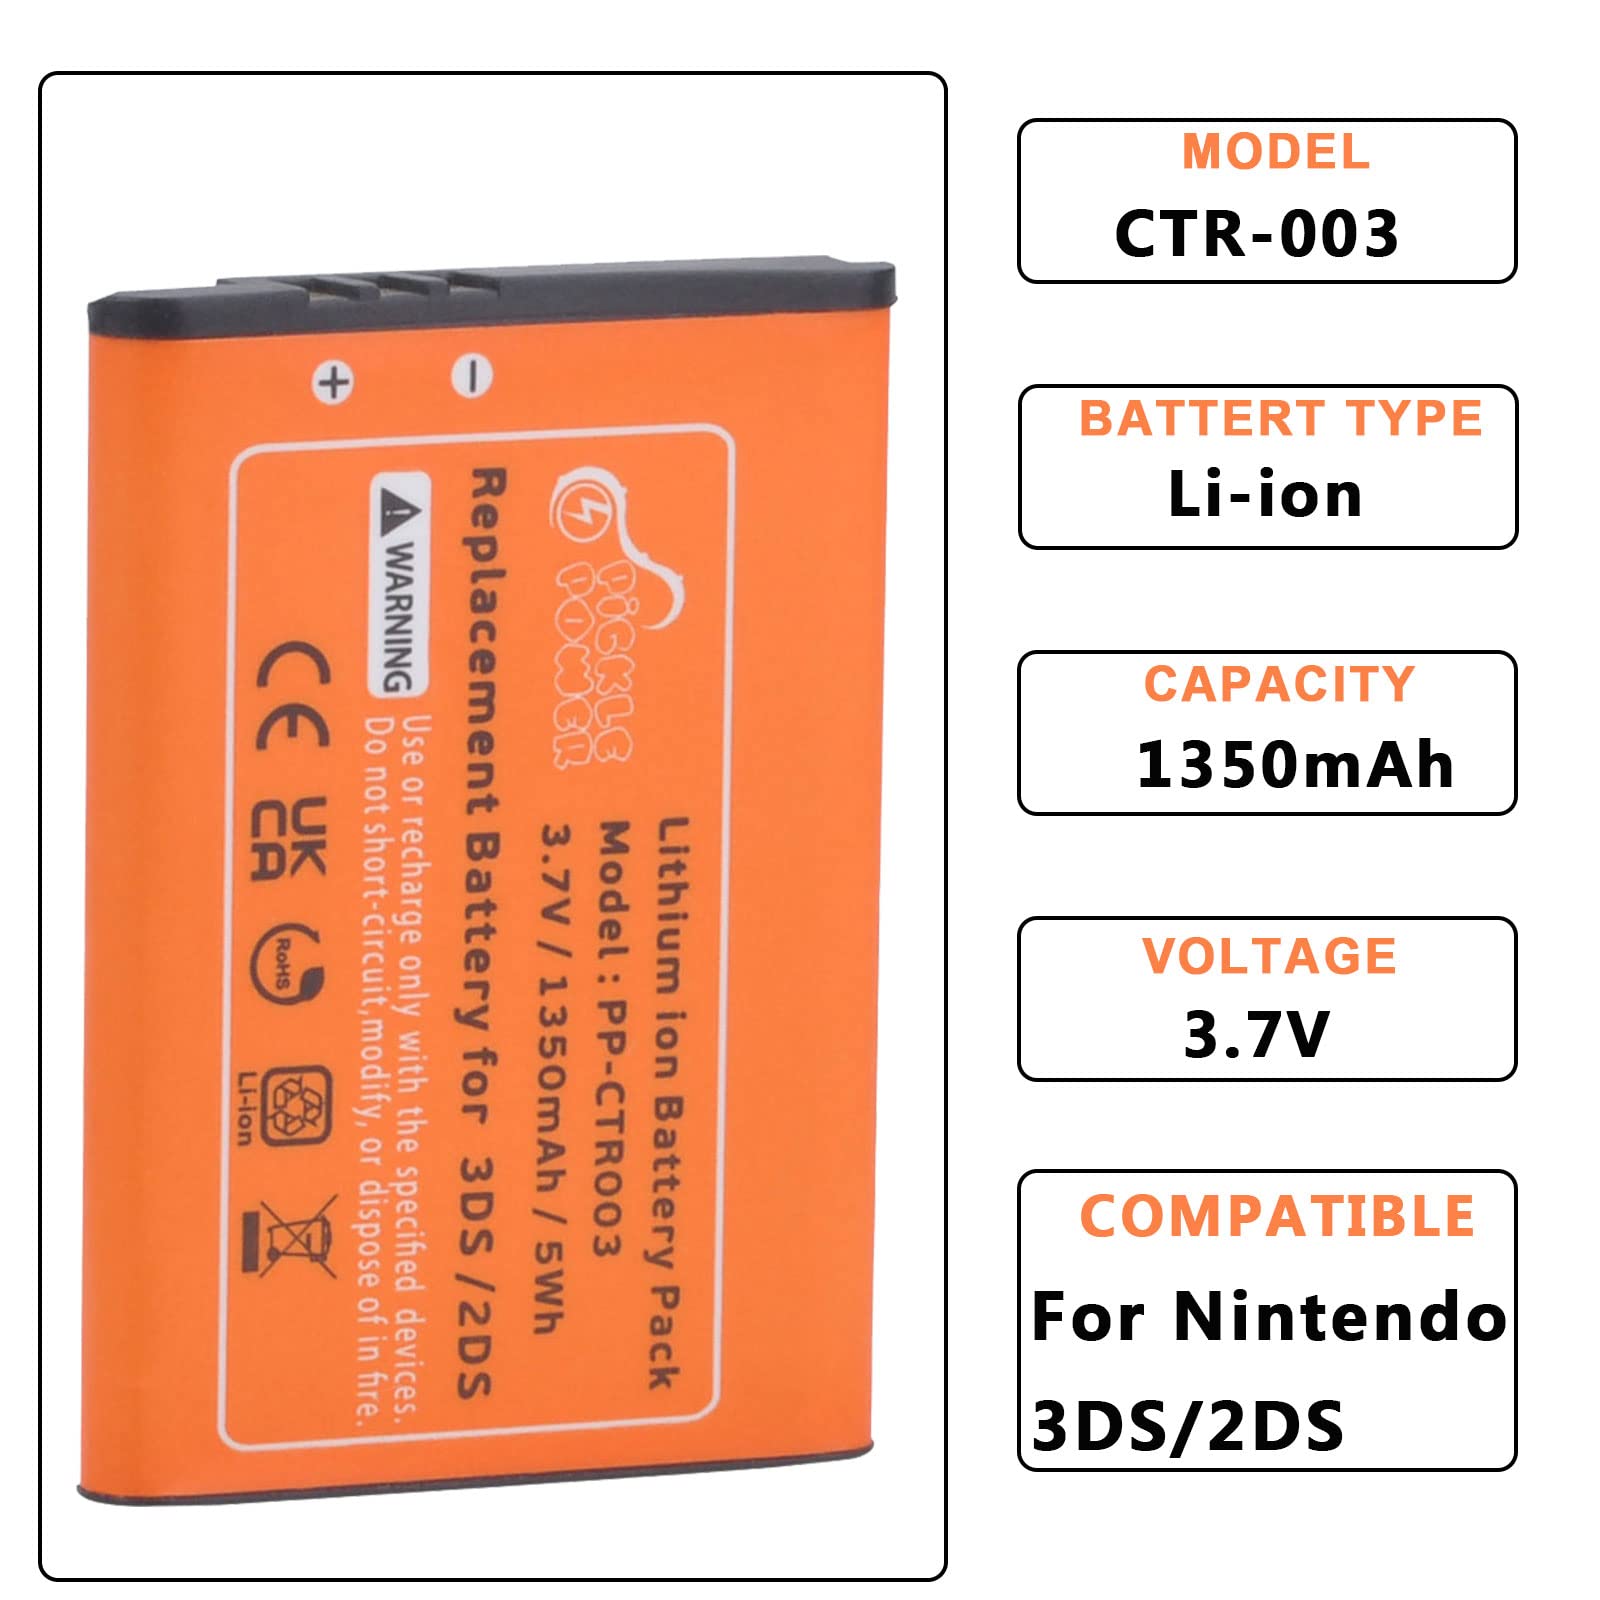 Pickle Power 3DS Battery, 1350mAh CTR-003 Battery for Nintendo 3DS, 2DS XL, 2DS Game Console with Tool Kit (Not for New 3DS and 3DS XL)